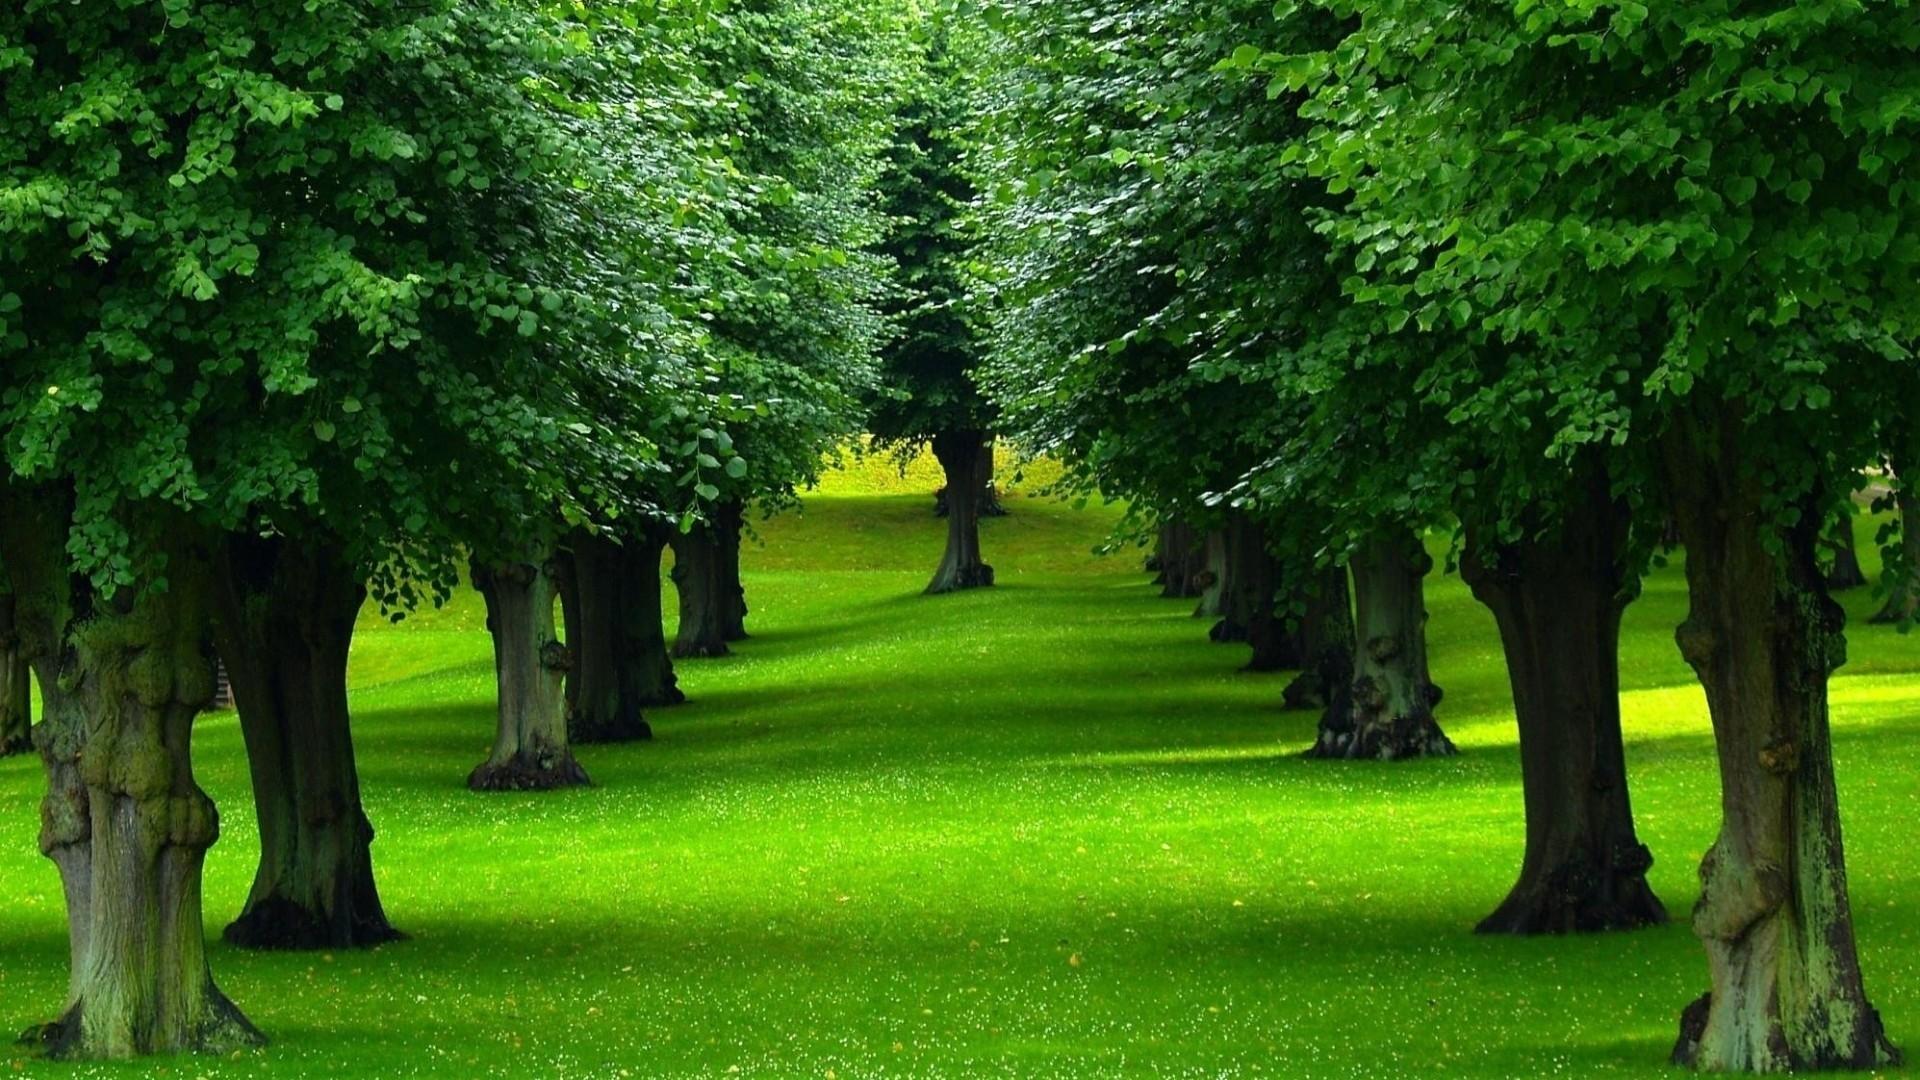 #green, #plants, #trees, #nature, #park, #forest, #grass